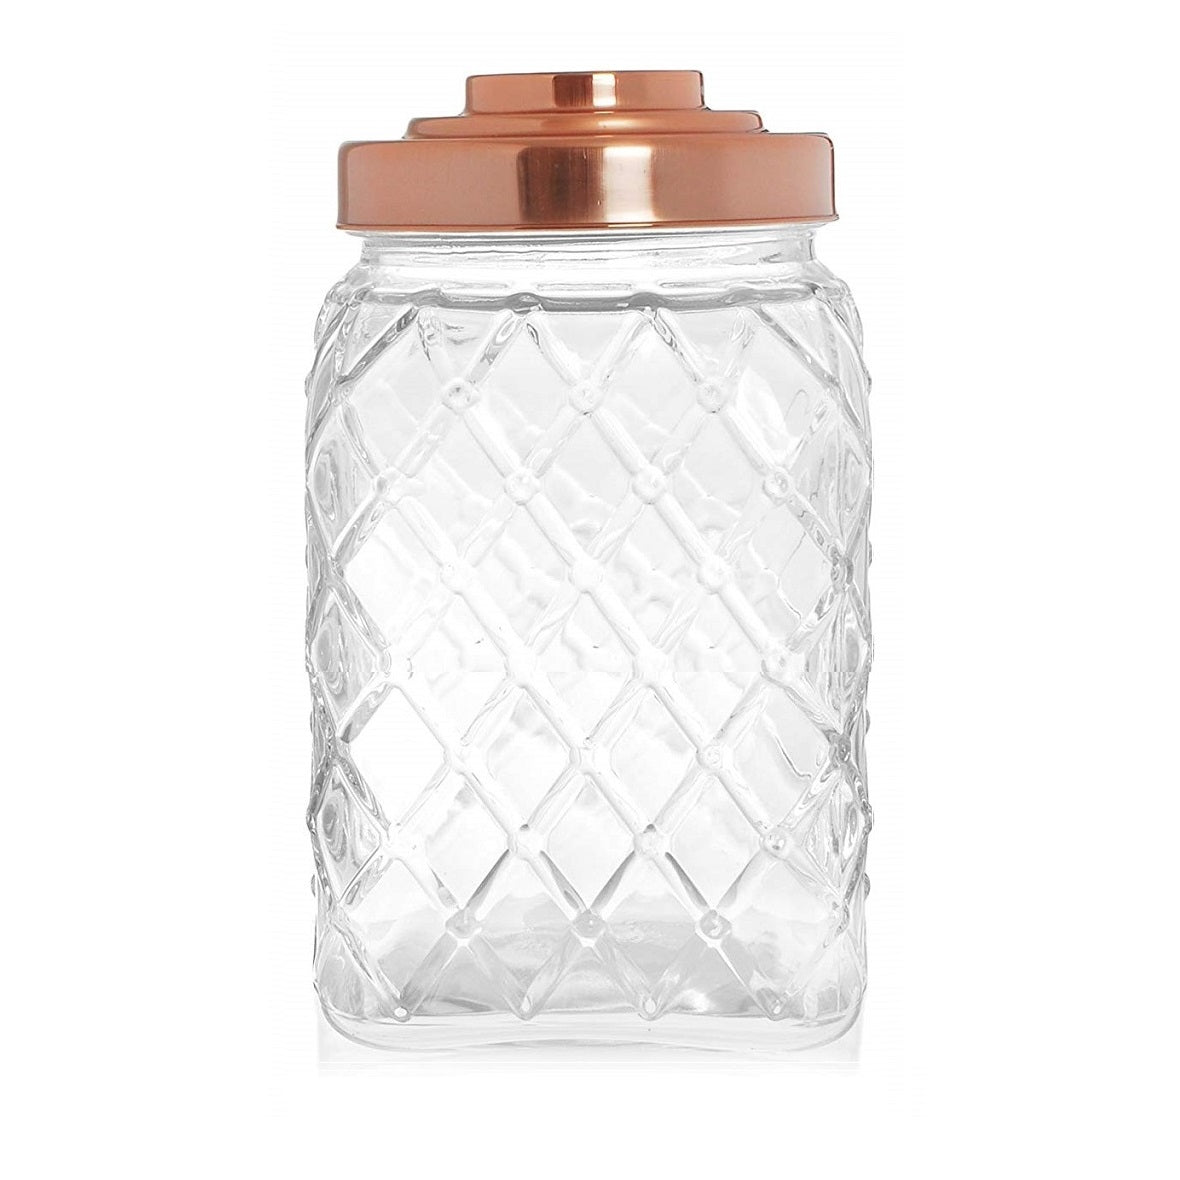 3.5L Square Glass Jar With Copper Lid